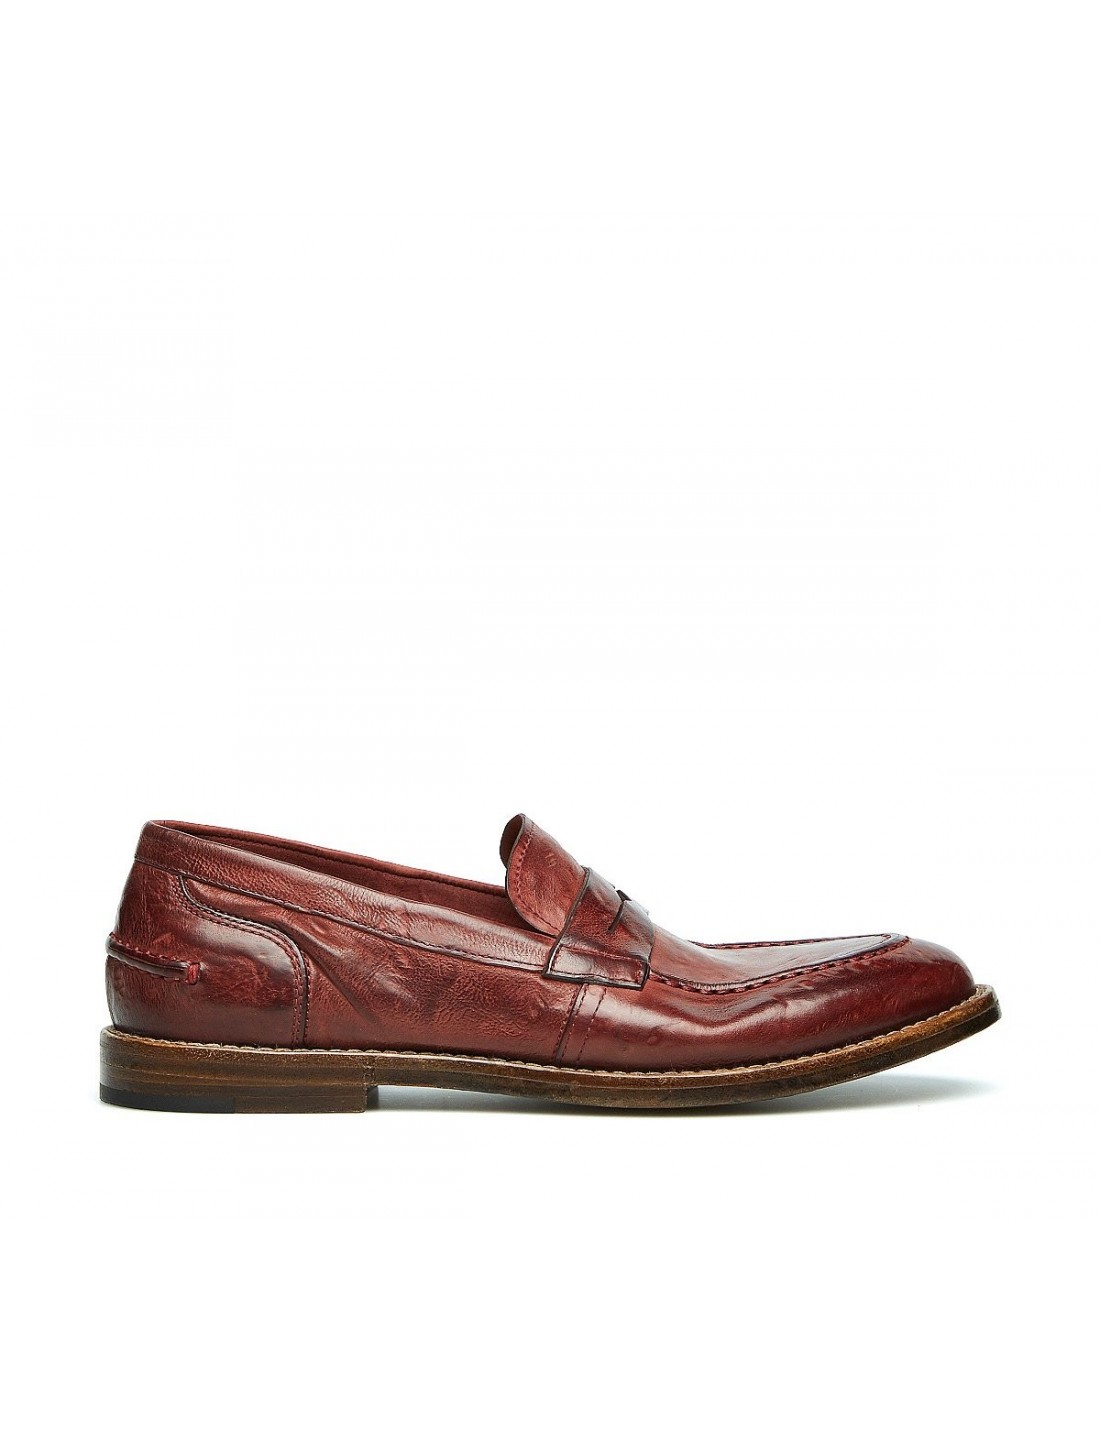 Vintage-style moccasins in calfskin with raised stitching and penny bar on the front - view 1